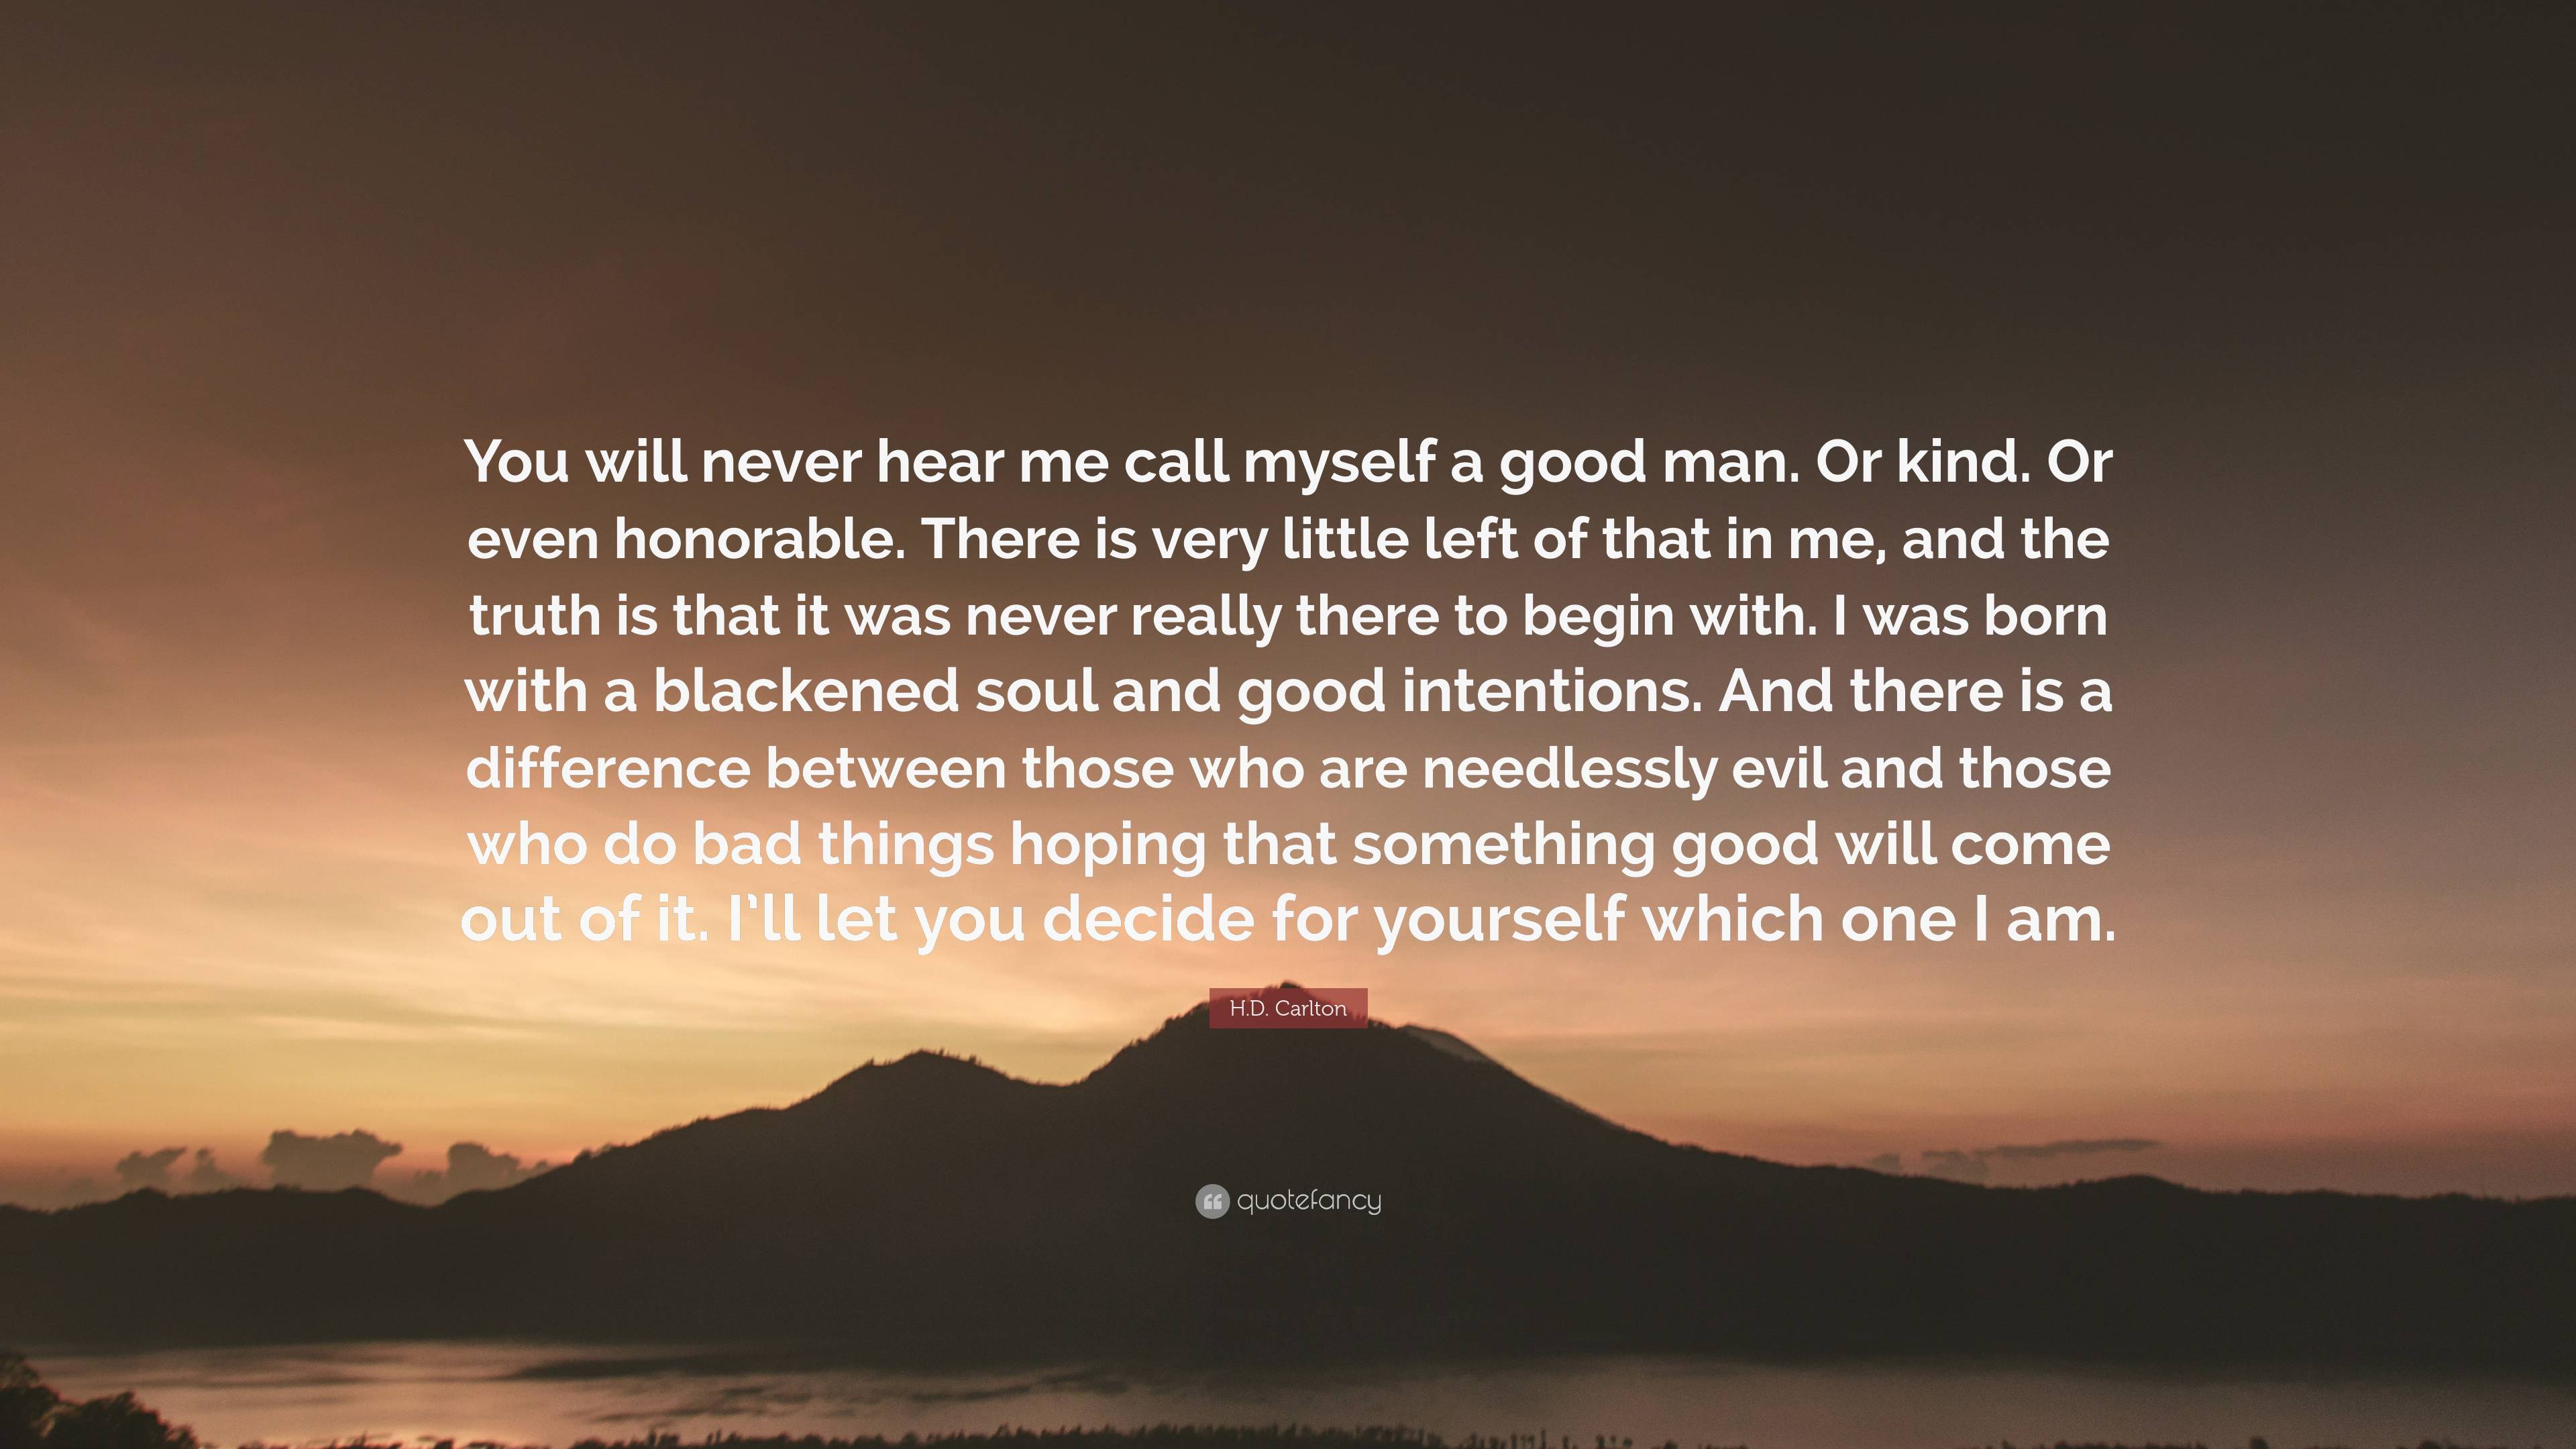 H.D. Carlton Quote: “You will never hear me call myself a good man. Or ...